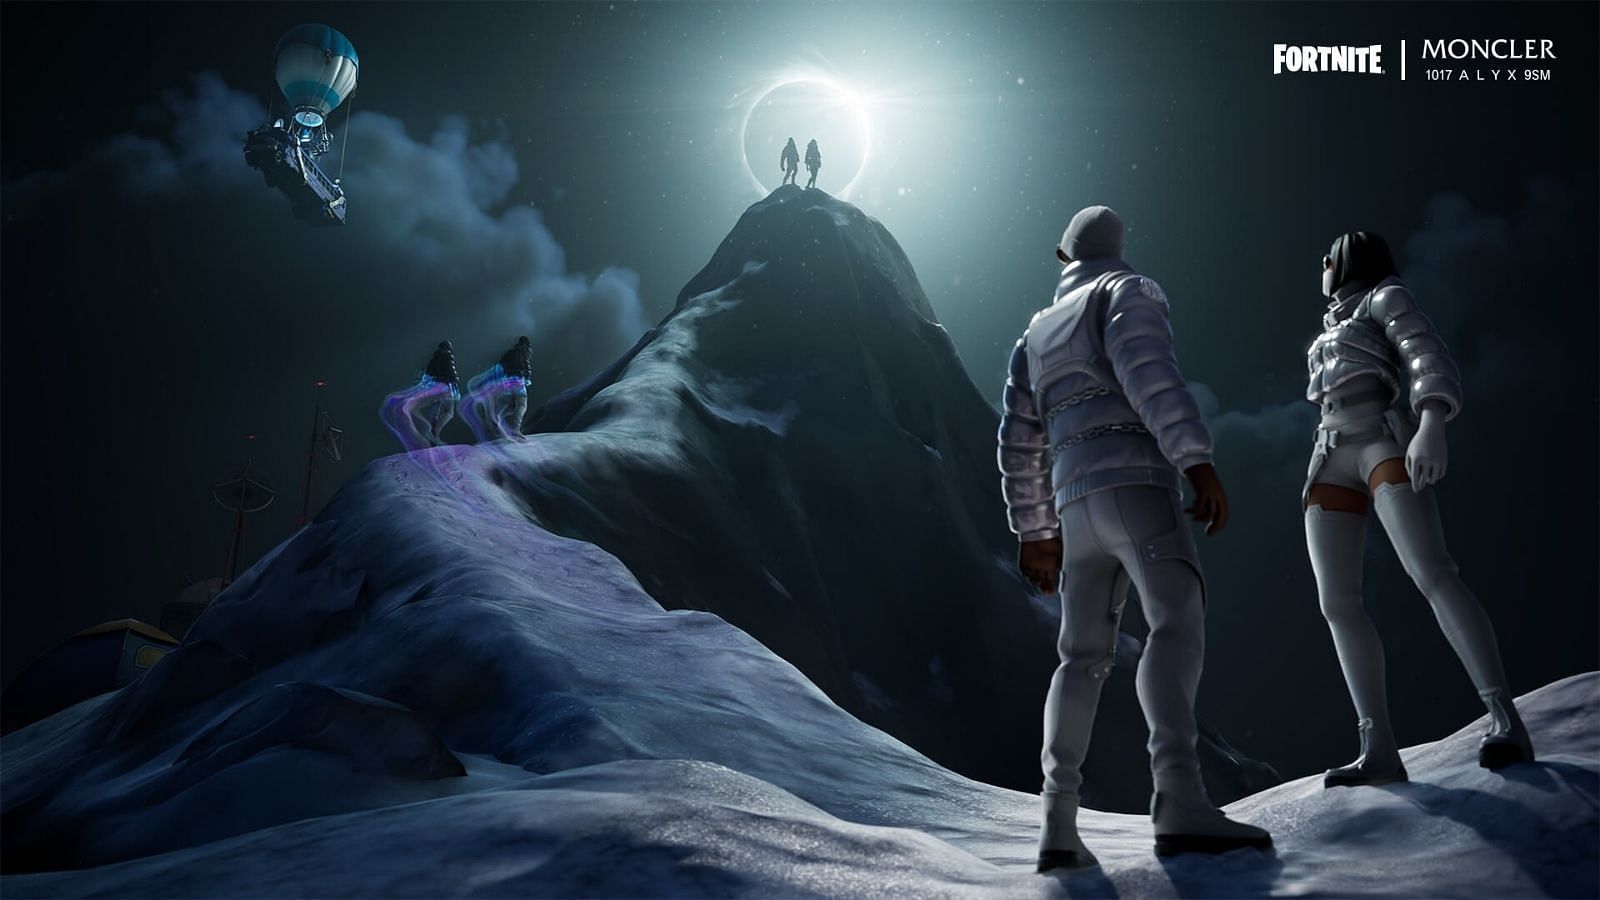 Fortnite is launching an official collaboration with Moncler (Image via Epic Games)